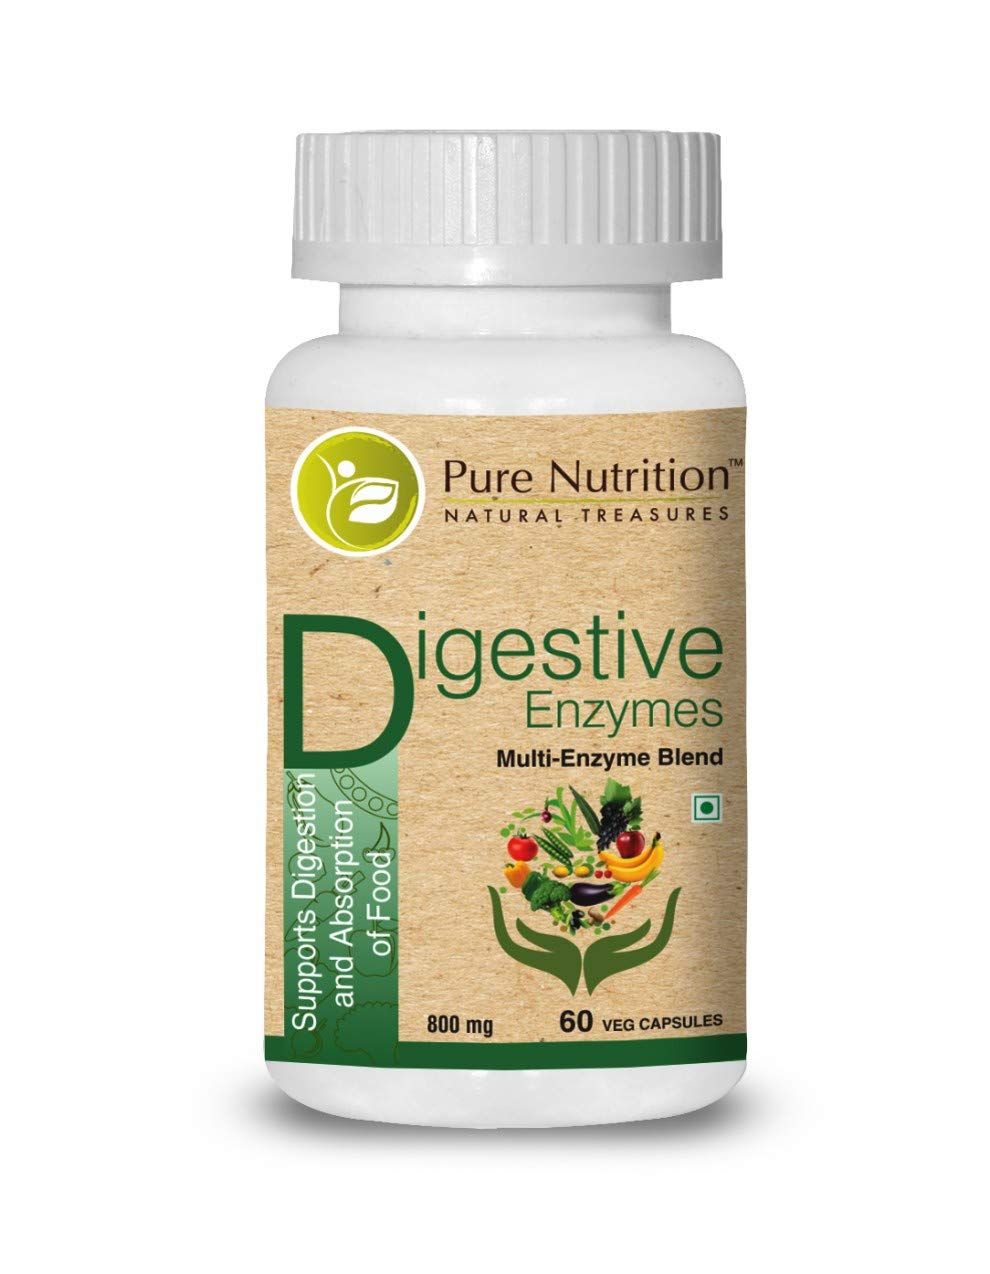 Pure Nutrition Digestive Enzymes Image